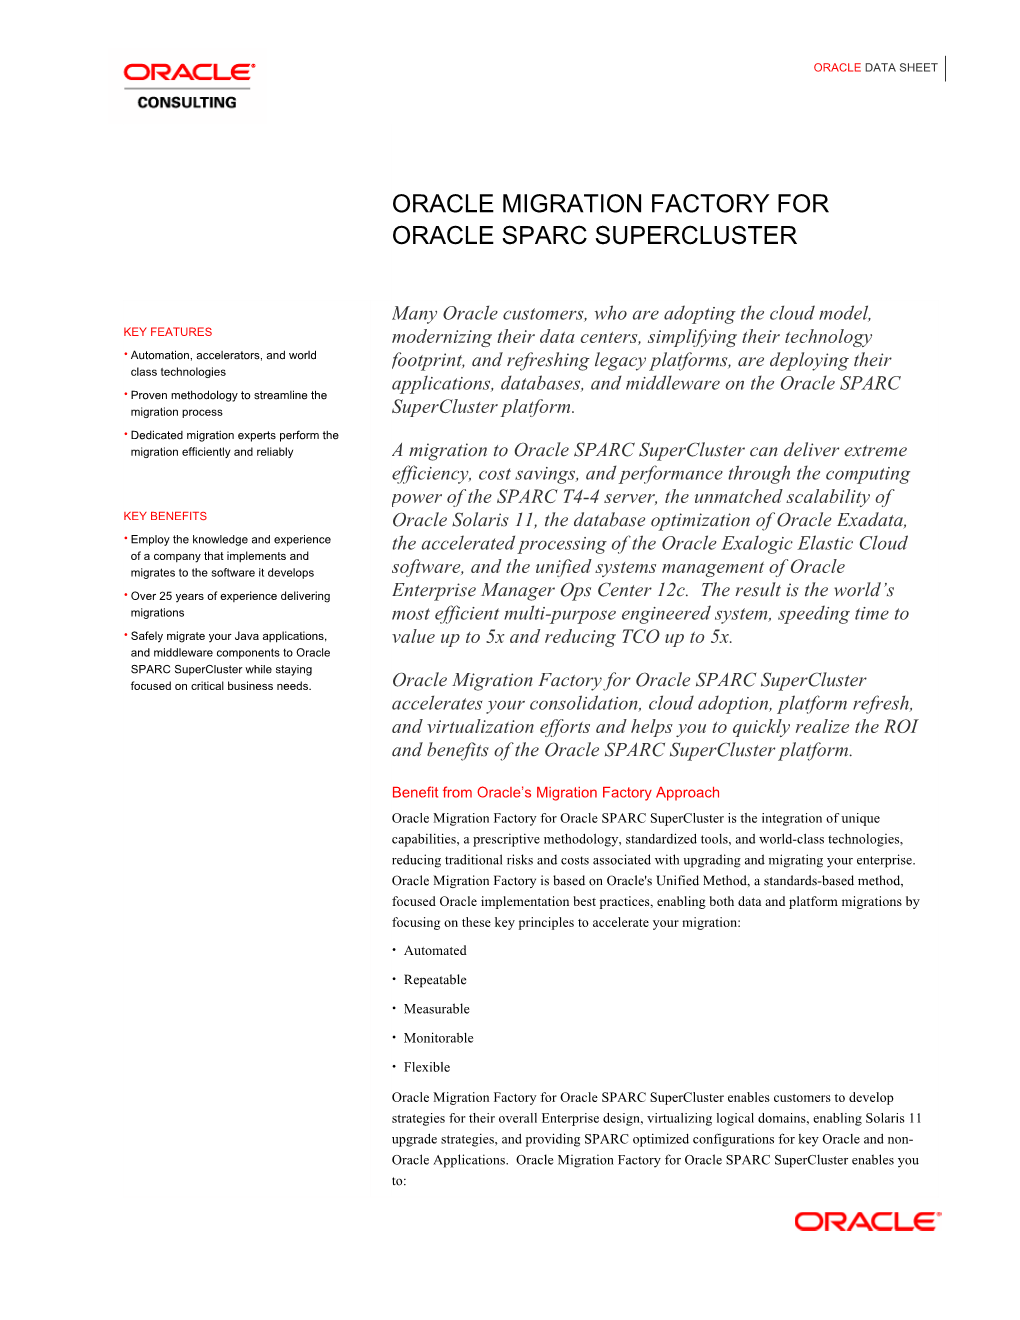 Oracle Migration Factory for Oracle Sparc Supercluster